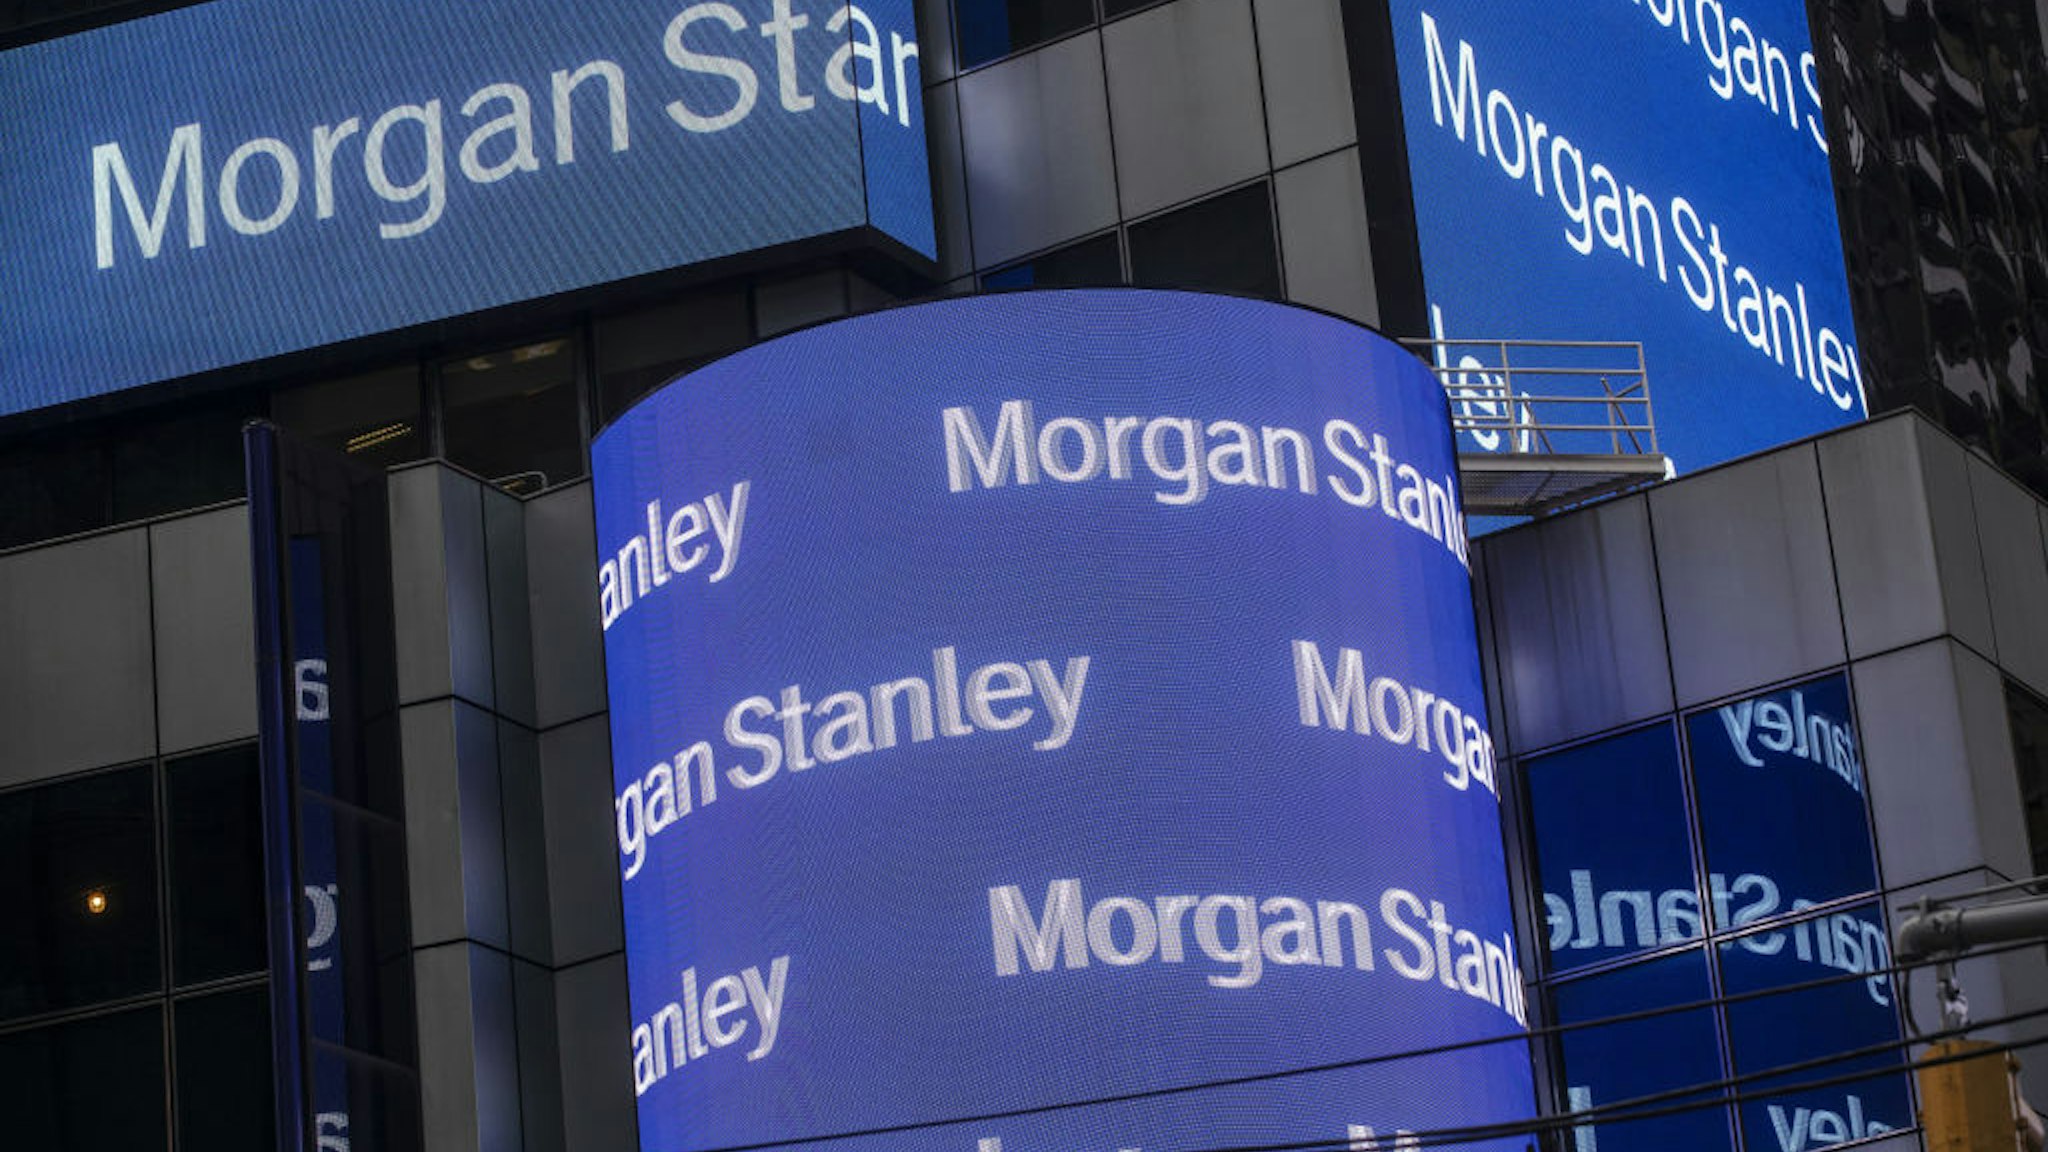 Morgan Stanley headquarters in New York, U.S., on Monday, Jan. 17, 2022. Morgan Stanley is scheduled to release earnings figures on January 19.